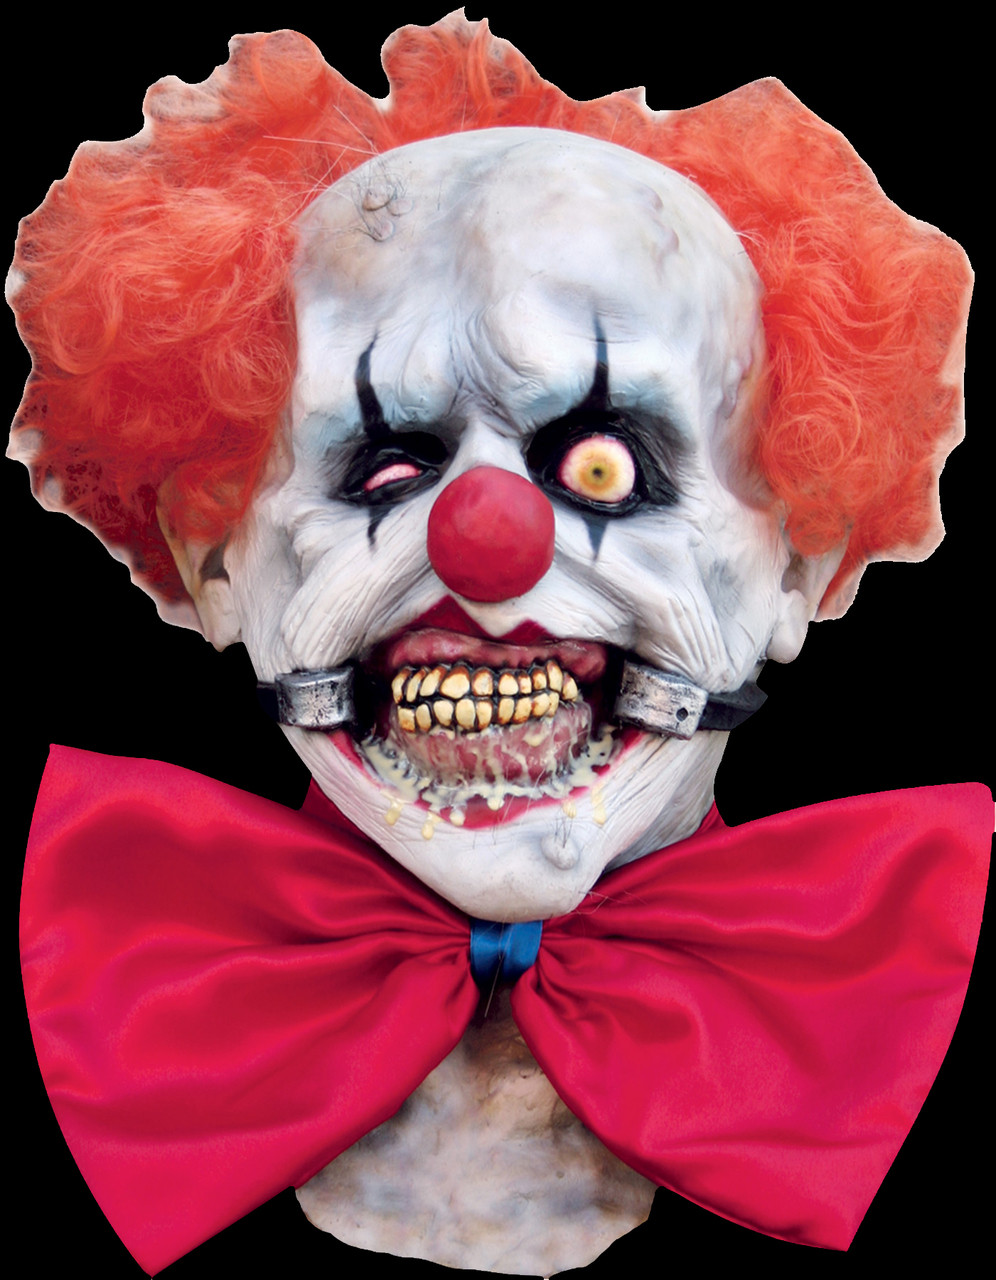 Smiley the Clown Evil Sinister Grinning Halloween Costume Mask